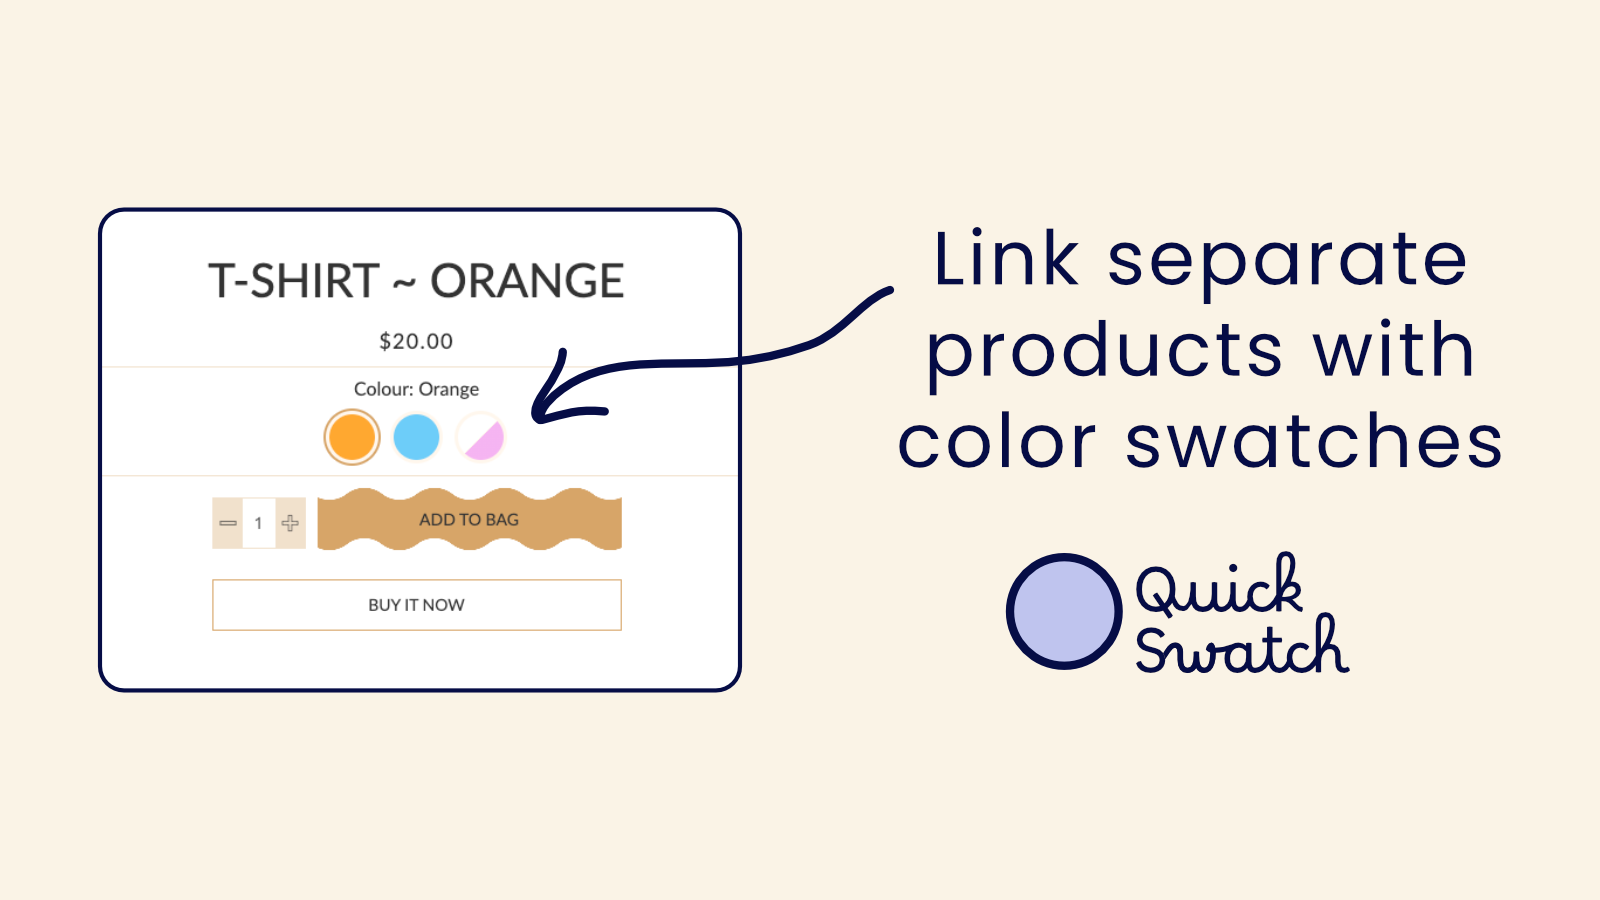 Link separate products with color swatches